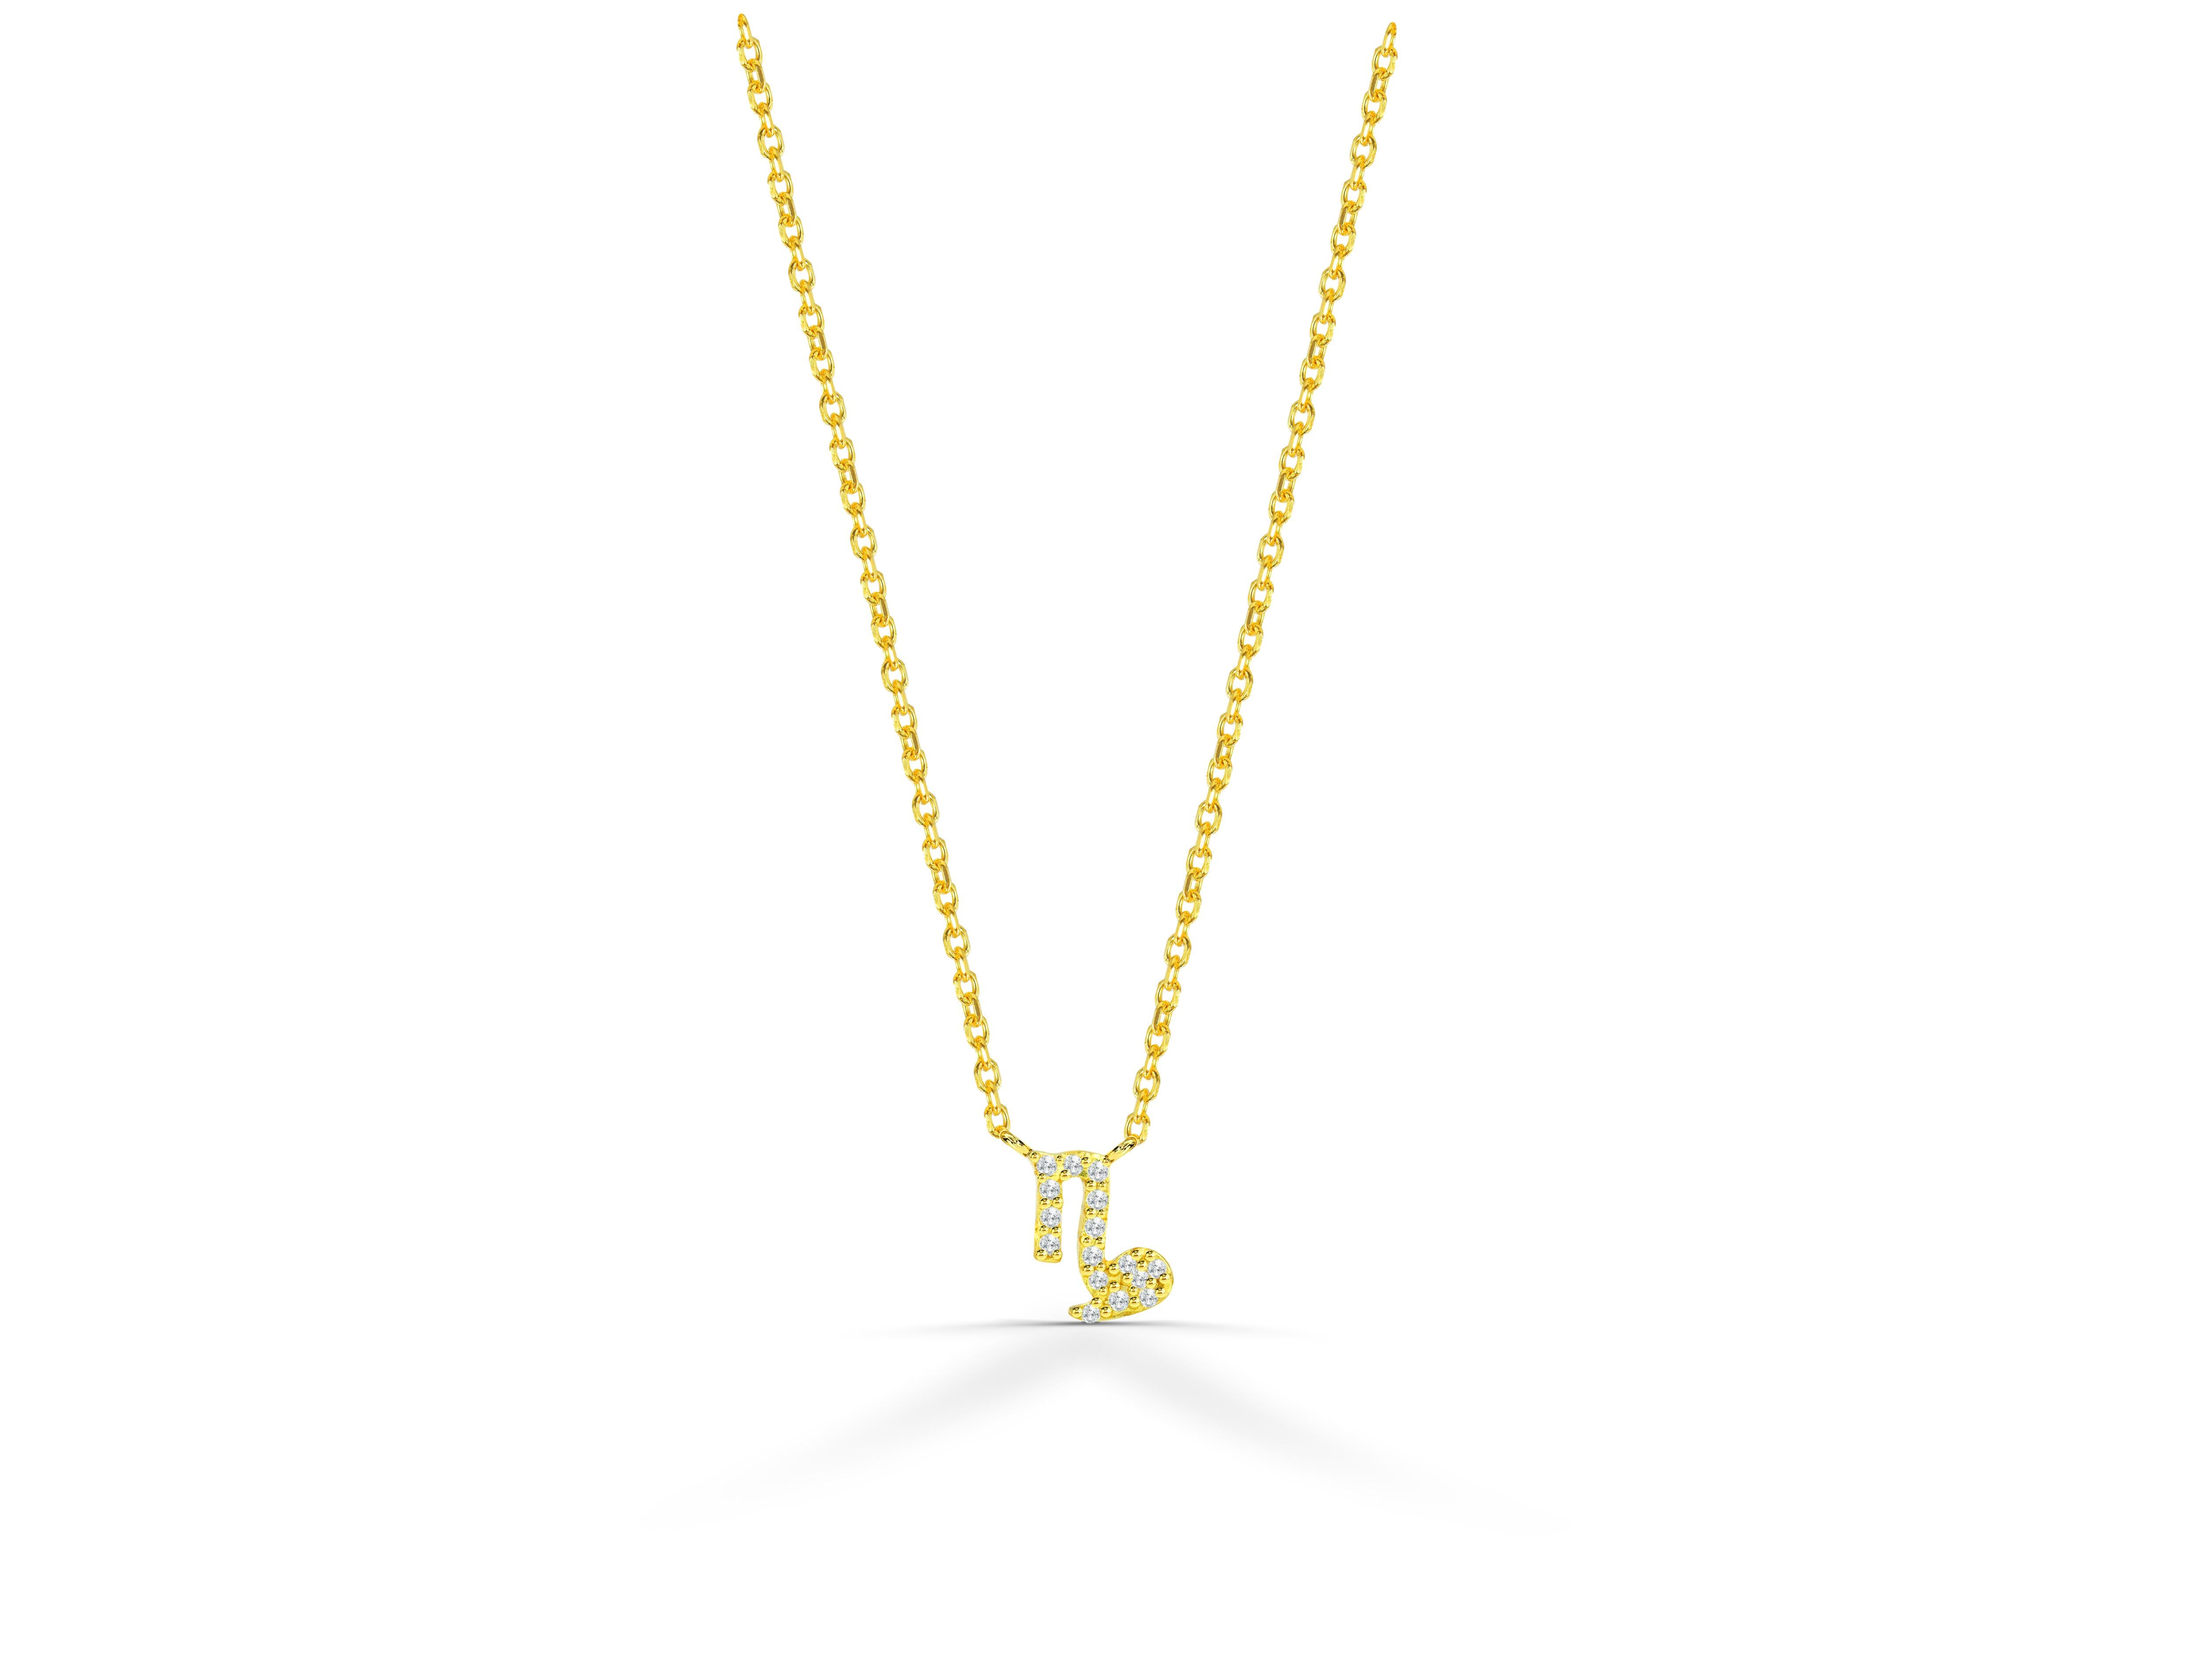 Beautiful and Sparkly Diamond Capricorn Necklace is made of 14k solid gold.
Available in three colors of gold: White Gold / Rose Gold / Yellow Gold.

Natural genuine round cut diamond each diamond is hand selected by me to ensure quality and set by